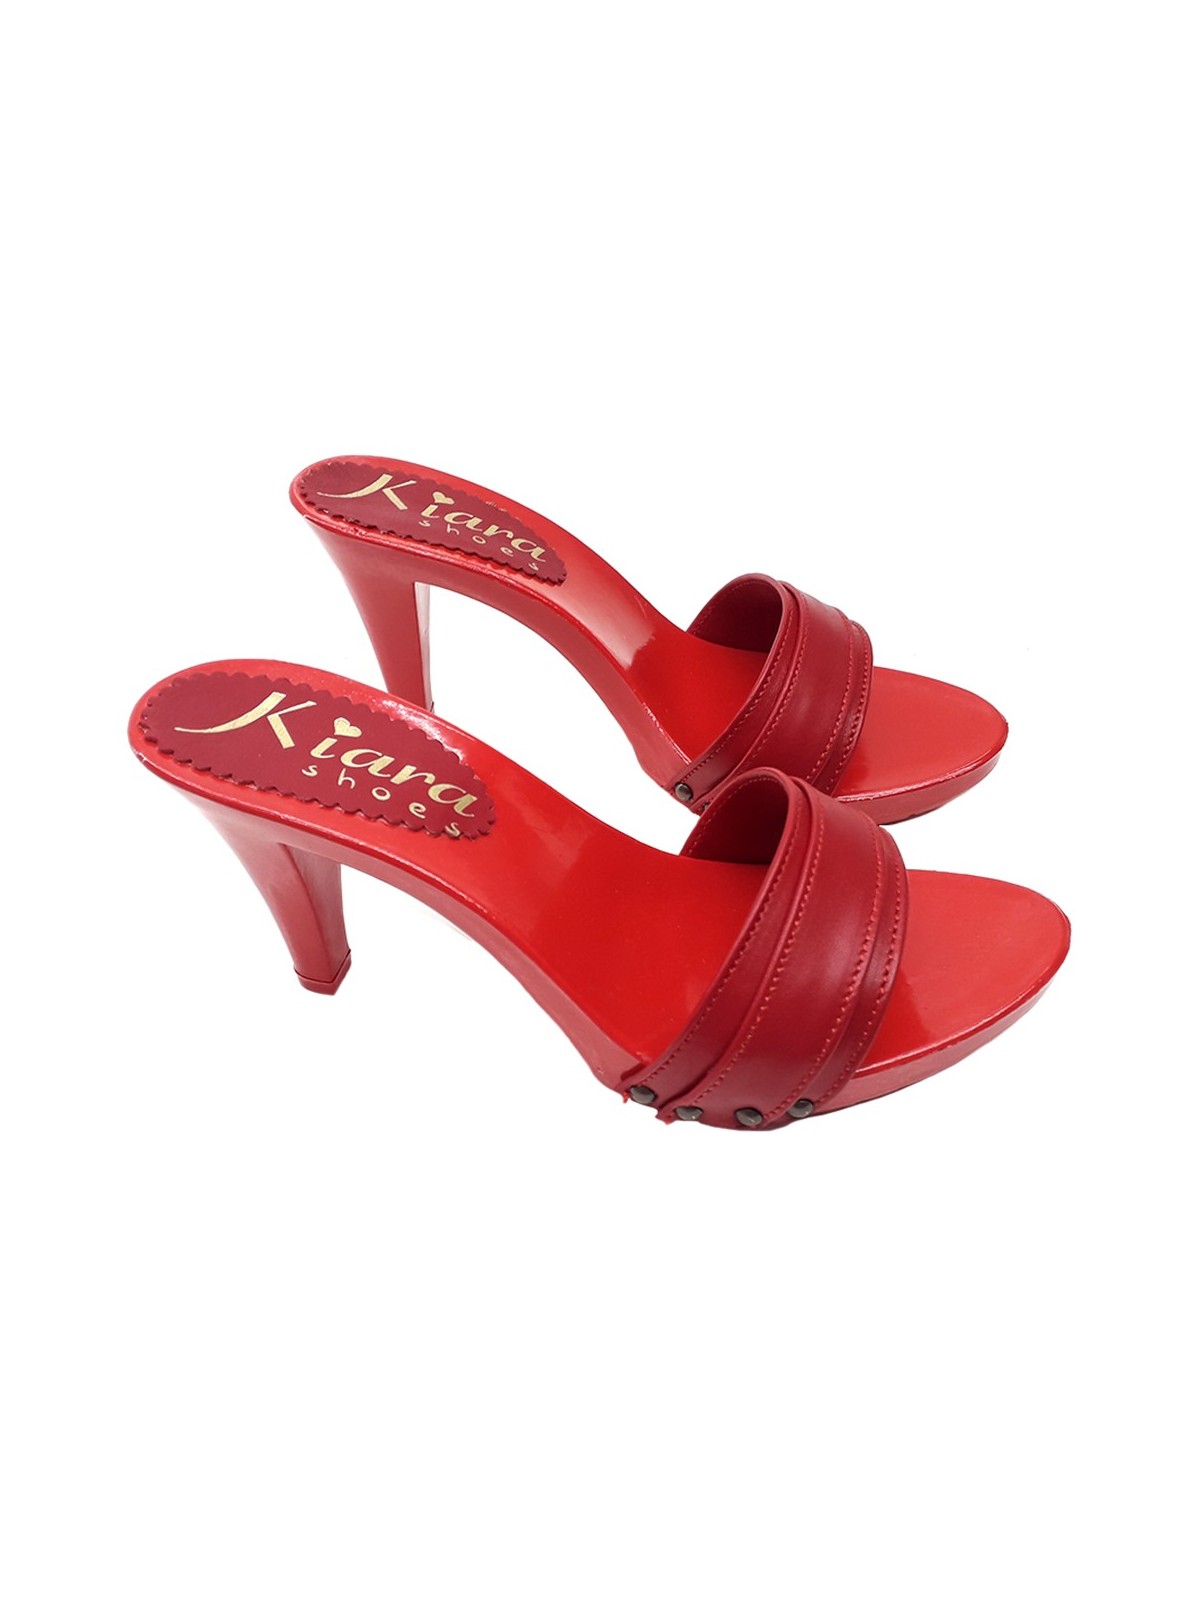 TOTAL RED CLOGS IN LEATHER HEEL 9